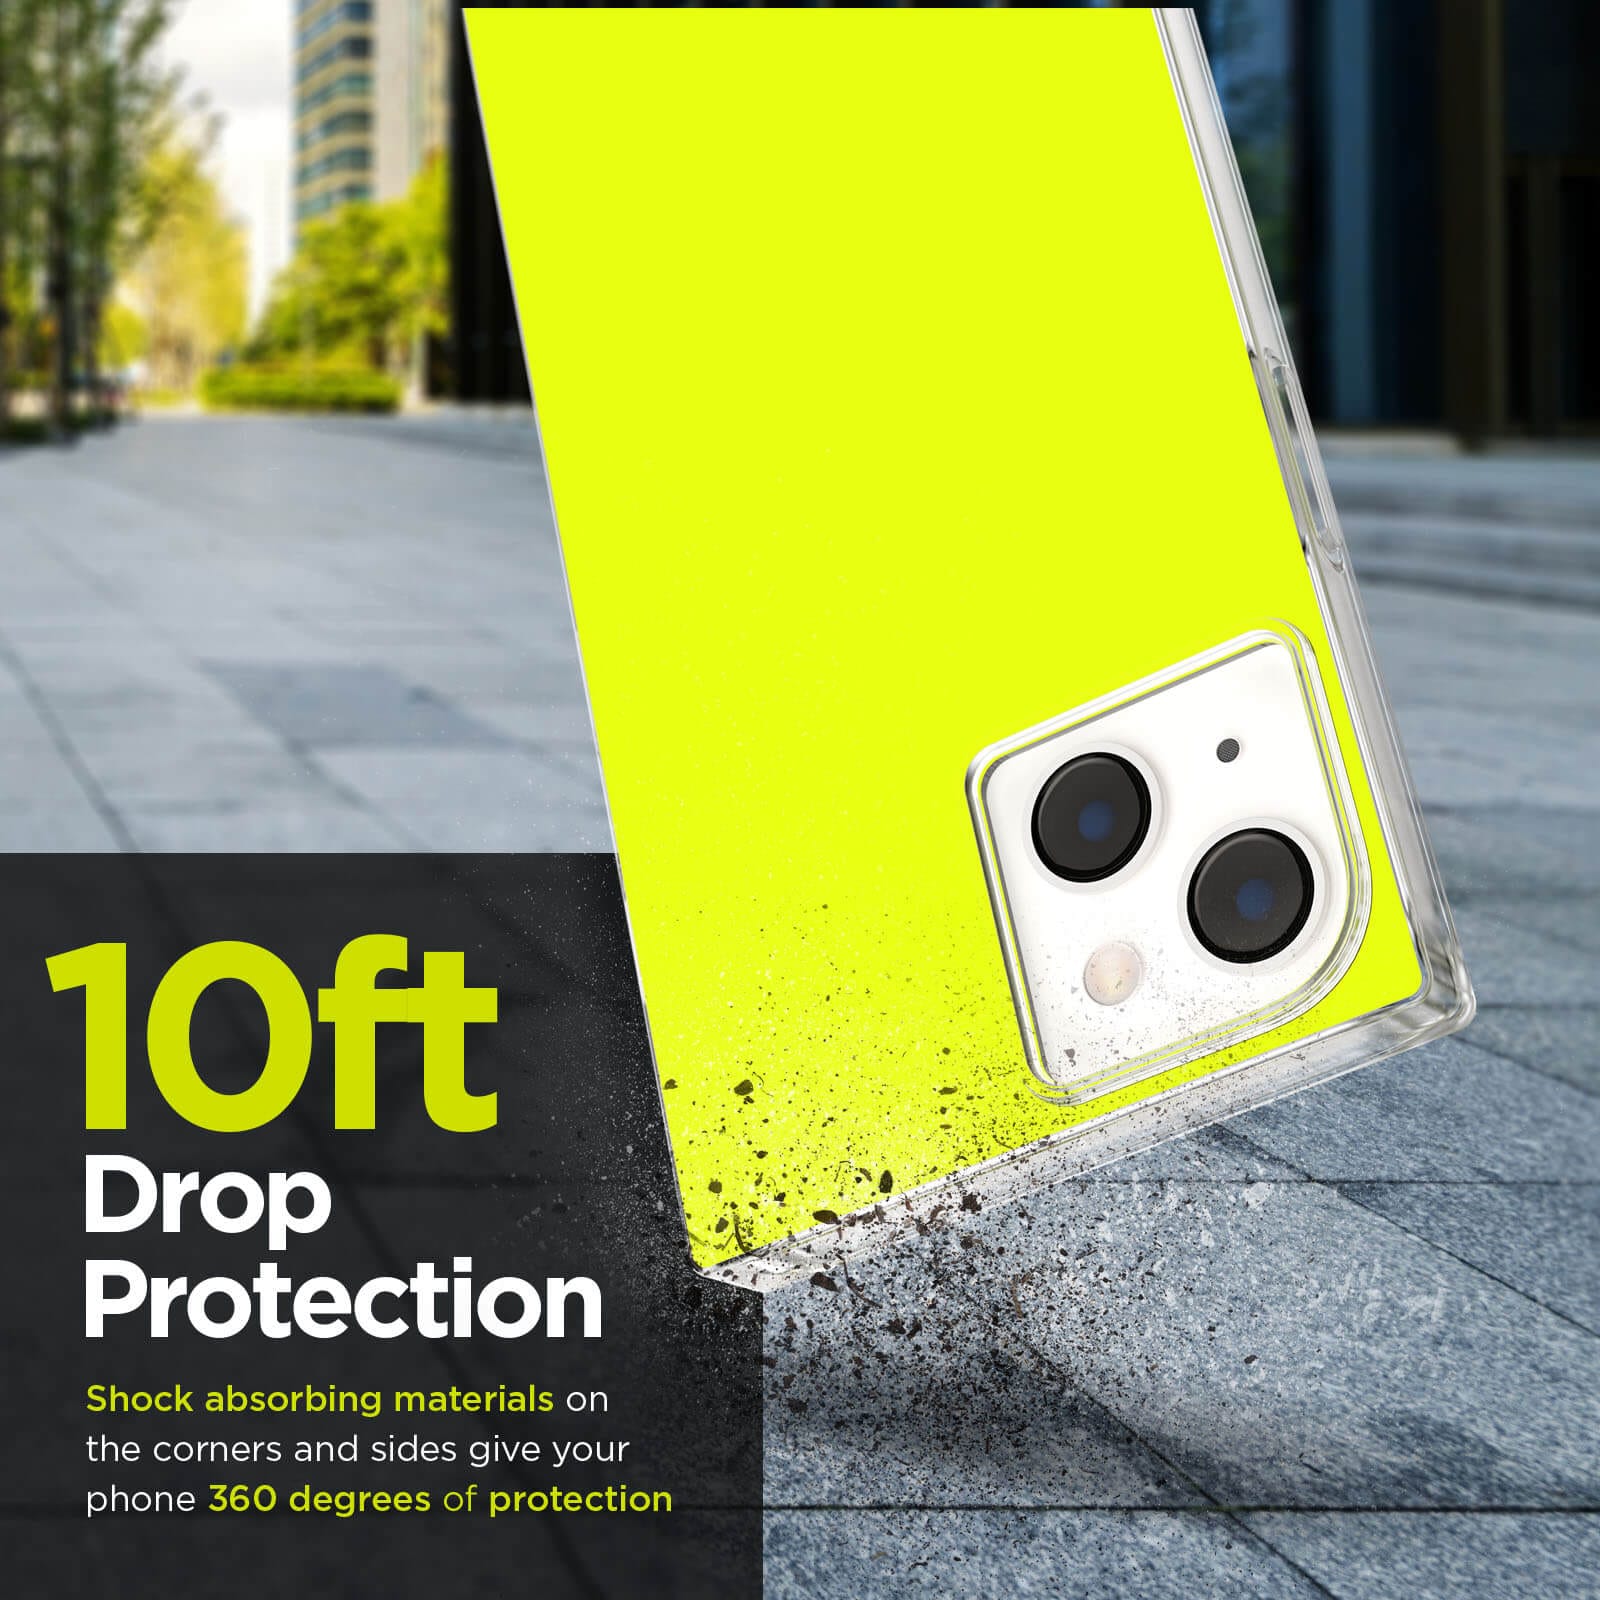 10ft drop protection. shock absorbing materials on the corners and sides give your phone 360 degrees of protection. color::Neon Yellow